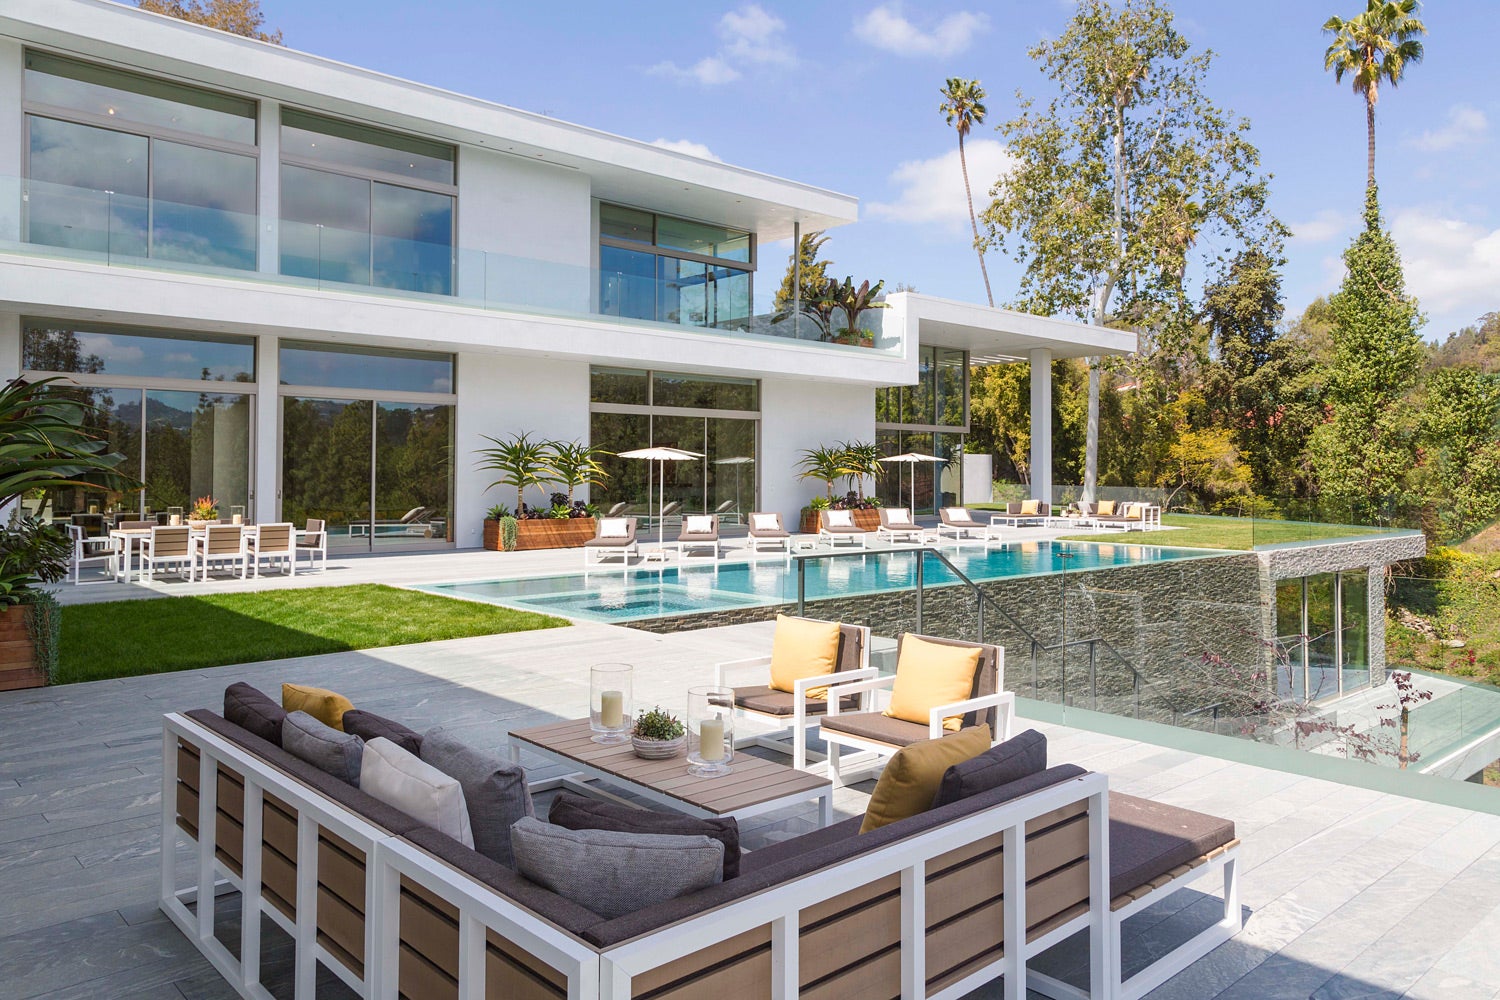 Crib Envy: Inside Beyonce and Jay Z's New Los Angeles Home